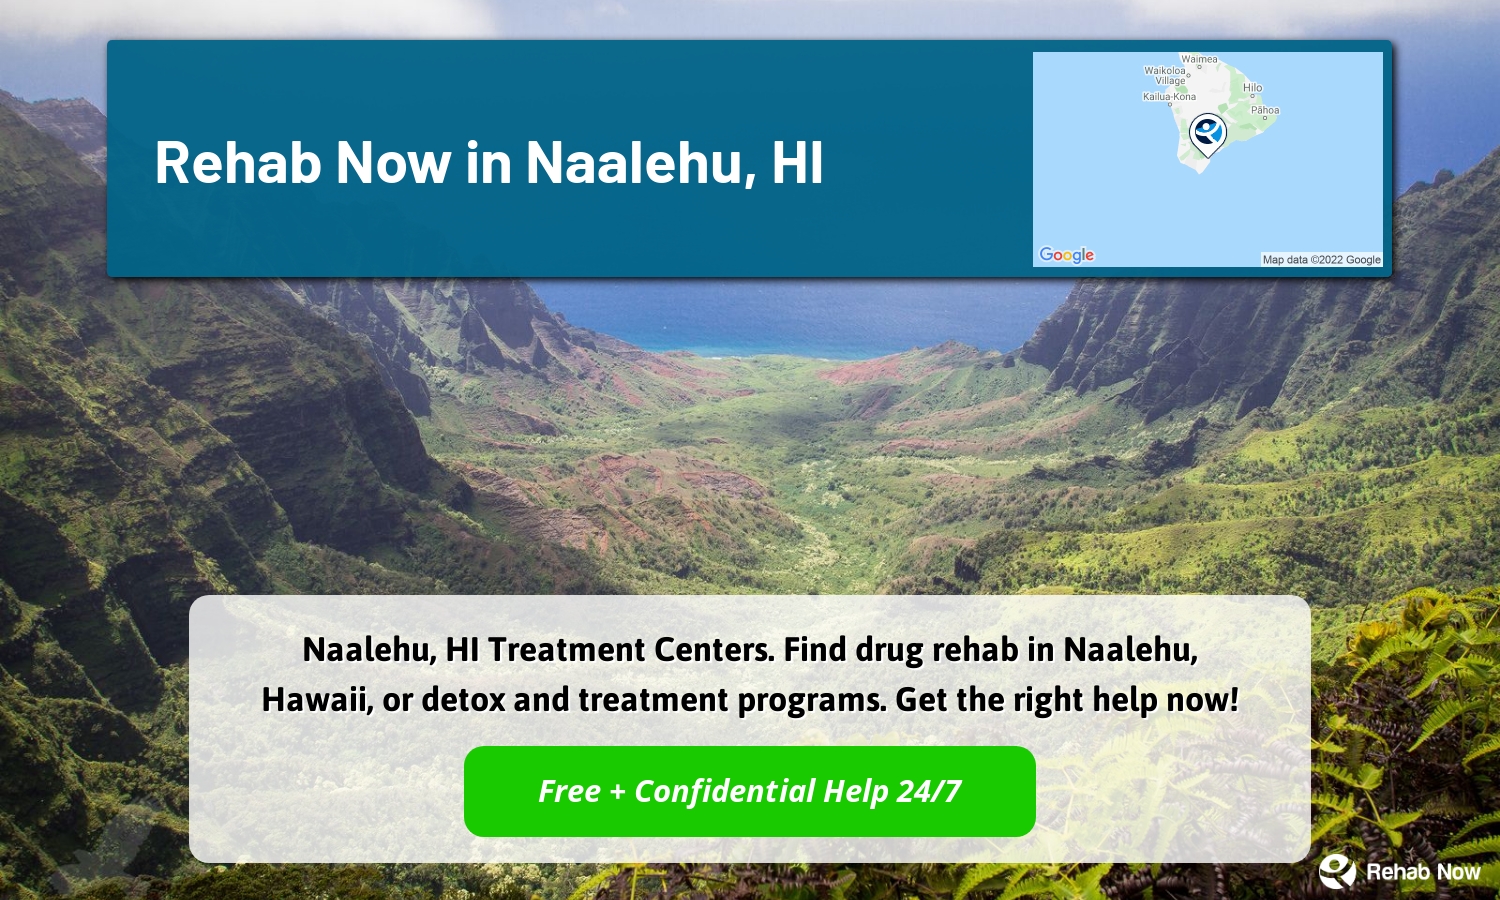 Naalehu, HI Treatment Centers. Find drug rehab in Naalehu, Hawaii, or detox and treatment programs. Get the right help now!